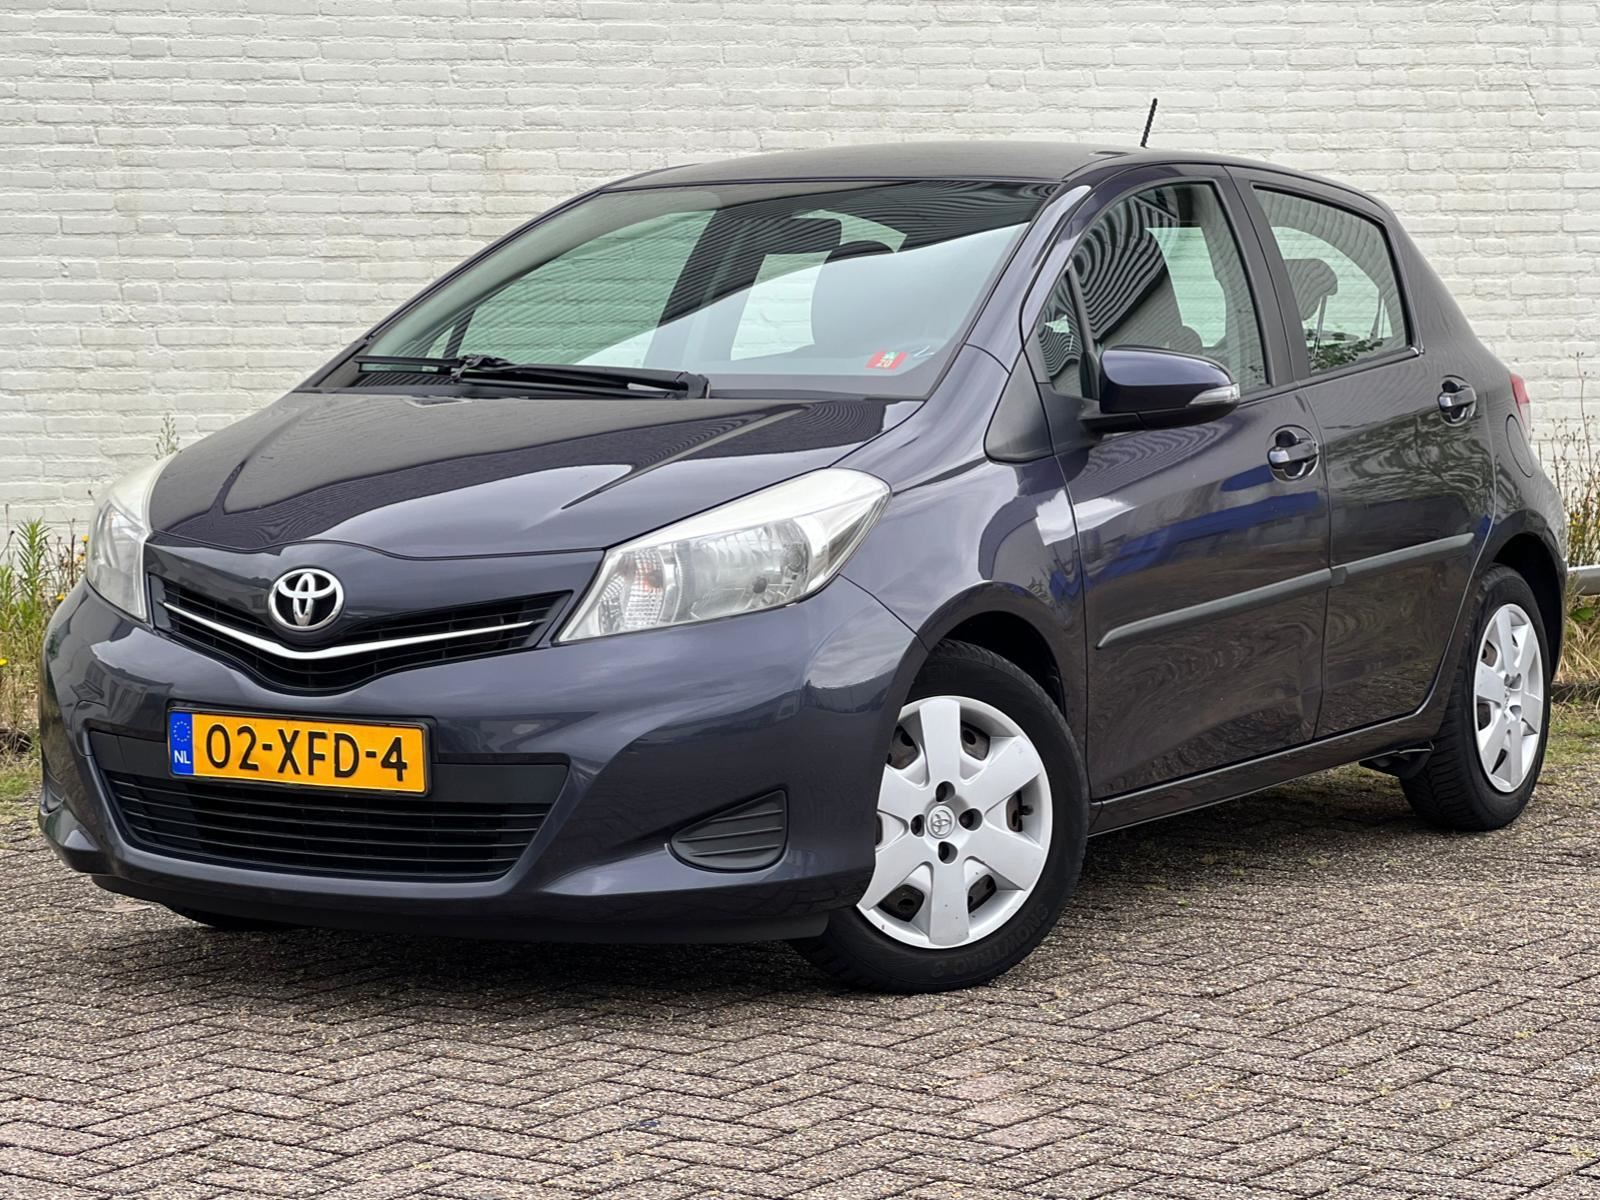 Toyota Yaris occasion - A2 Auto's